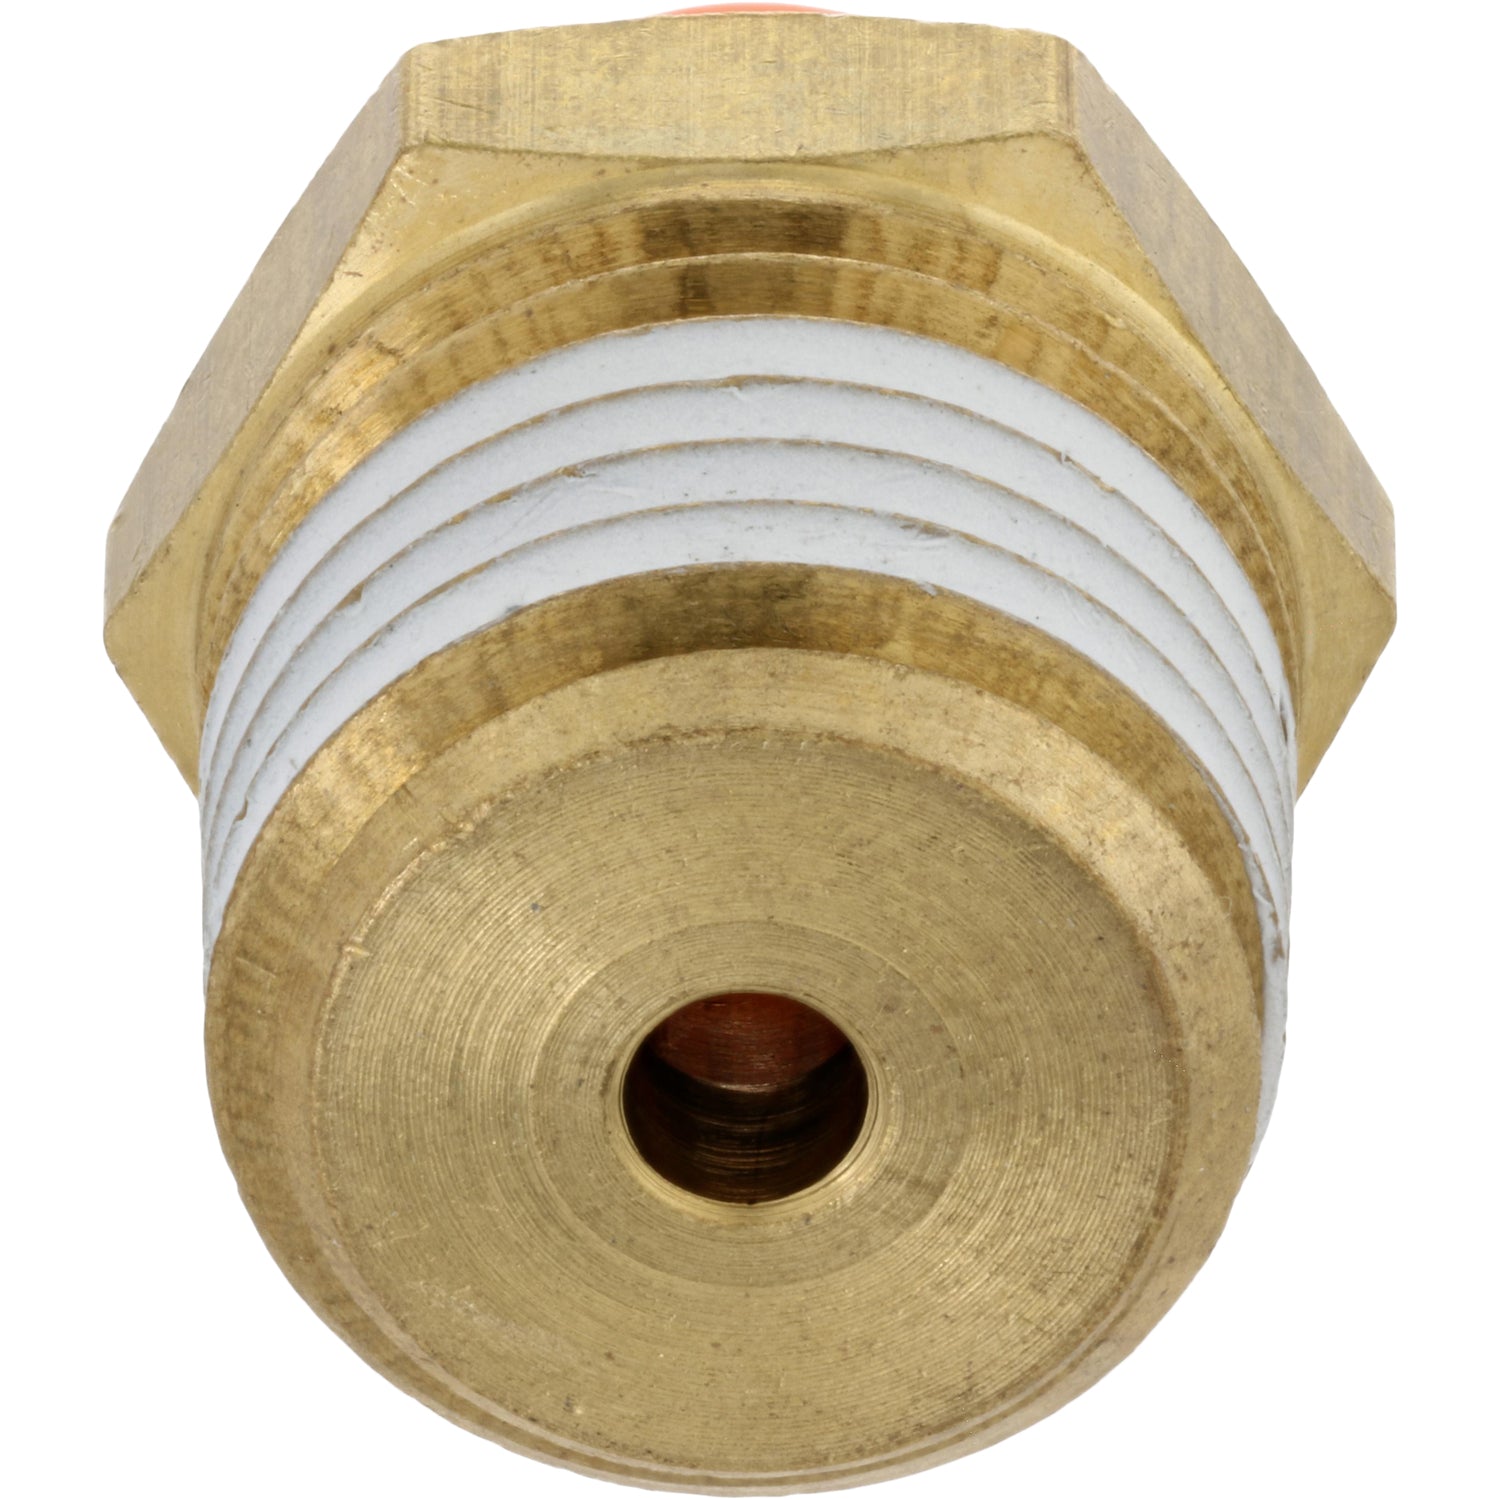 Brass threaded male connector with orange push collar on white background. 